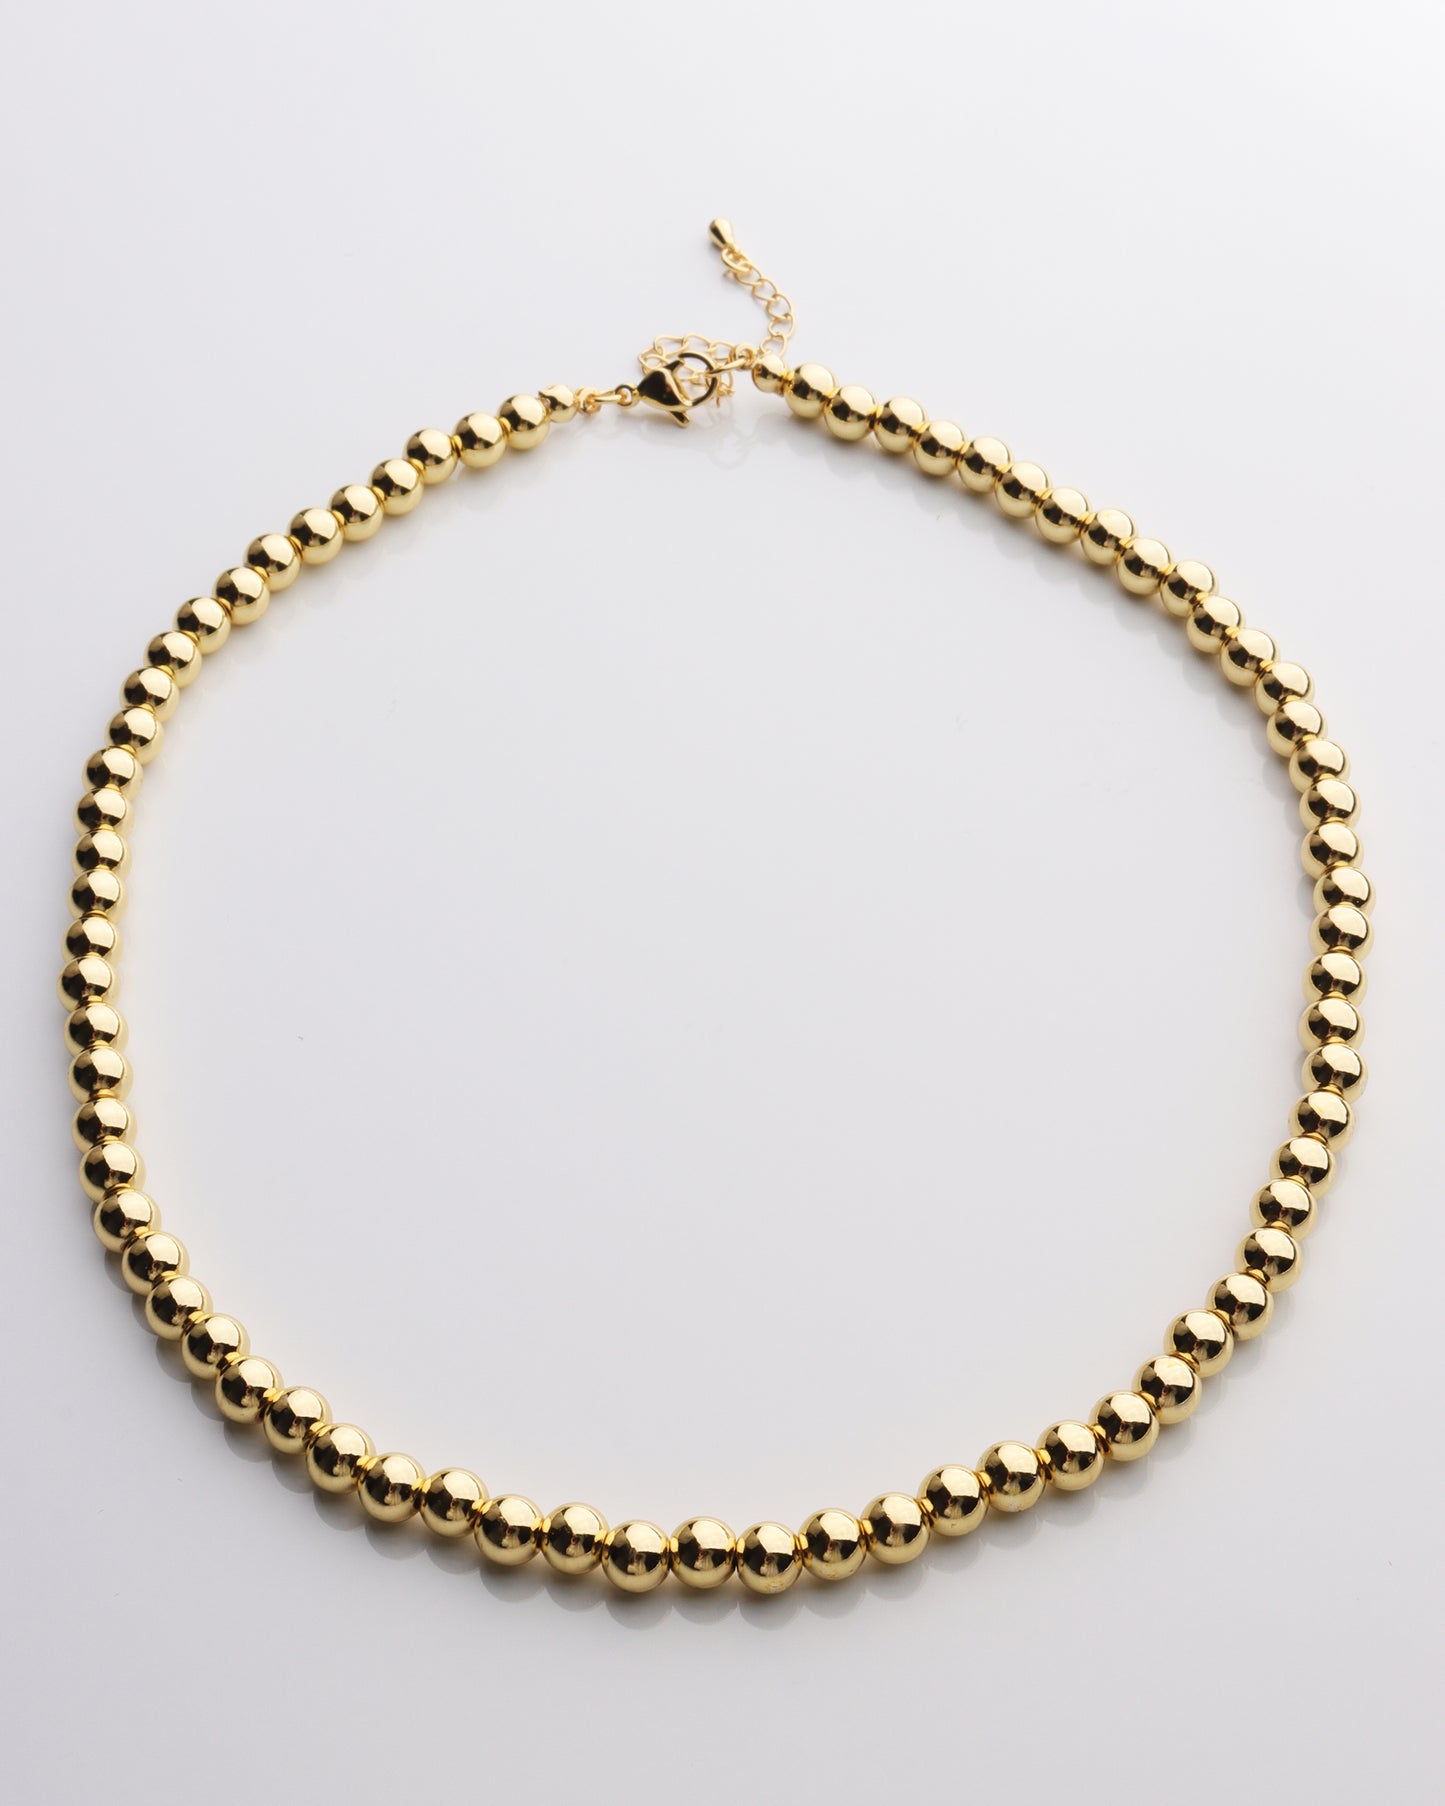 Large Gold Ball Bead Necklace